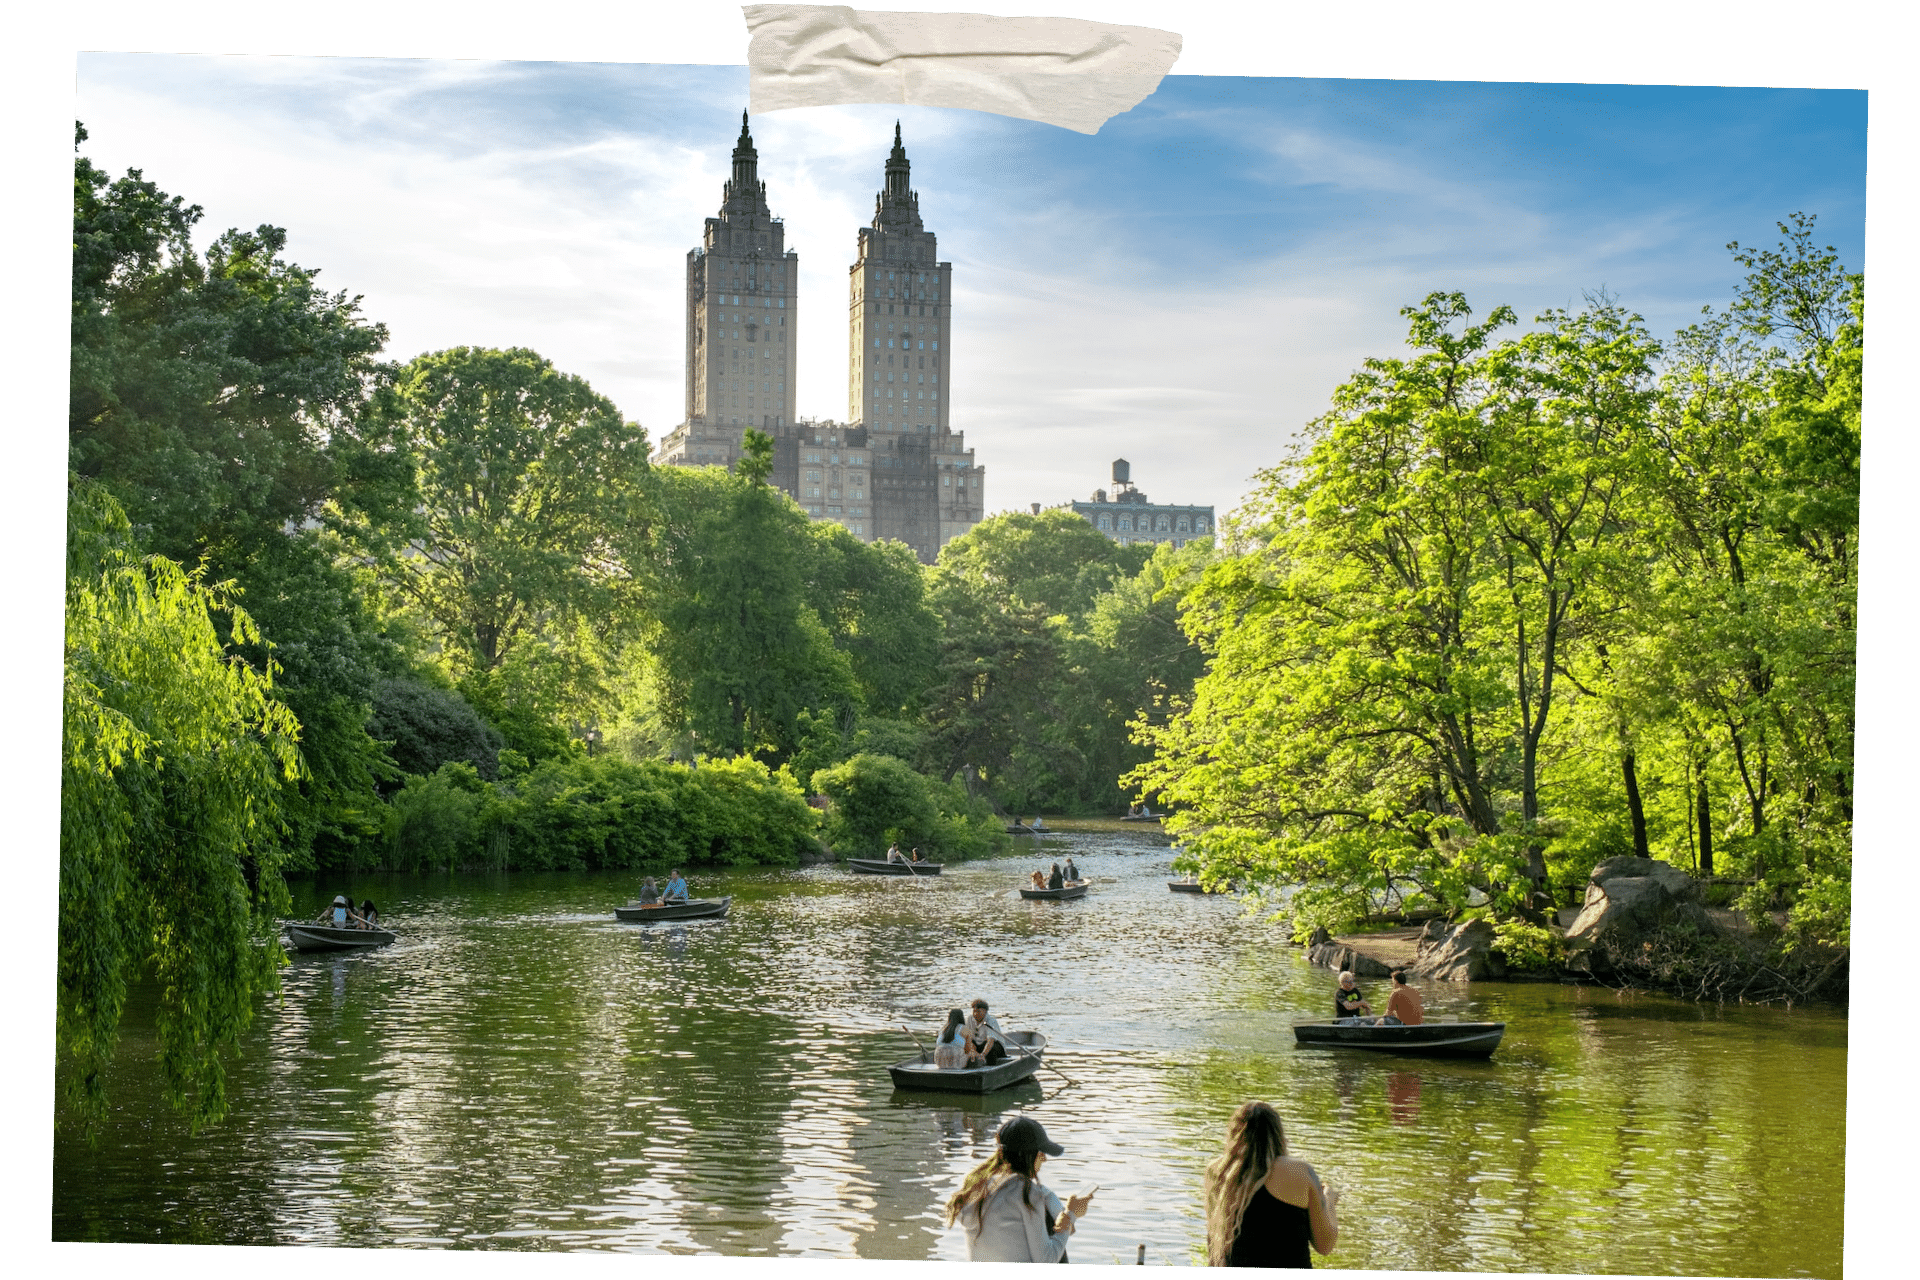 Picture shows boaters on the lake in Central Park, trees lining the bank, and high rises to the distance. Central Park is one of 8 great things to do outside in NYC.